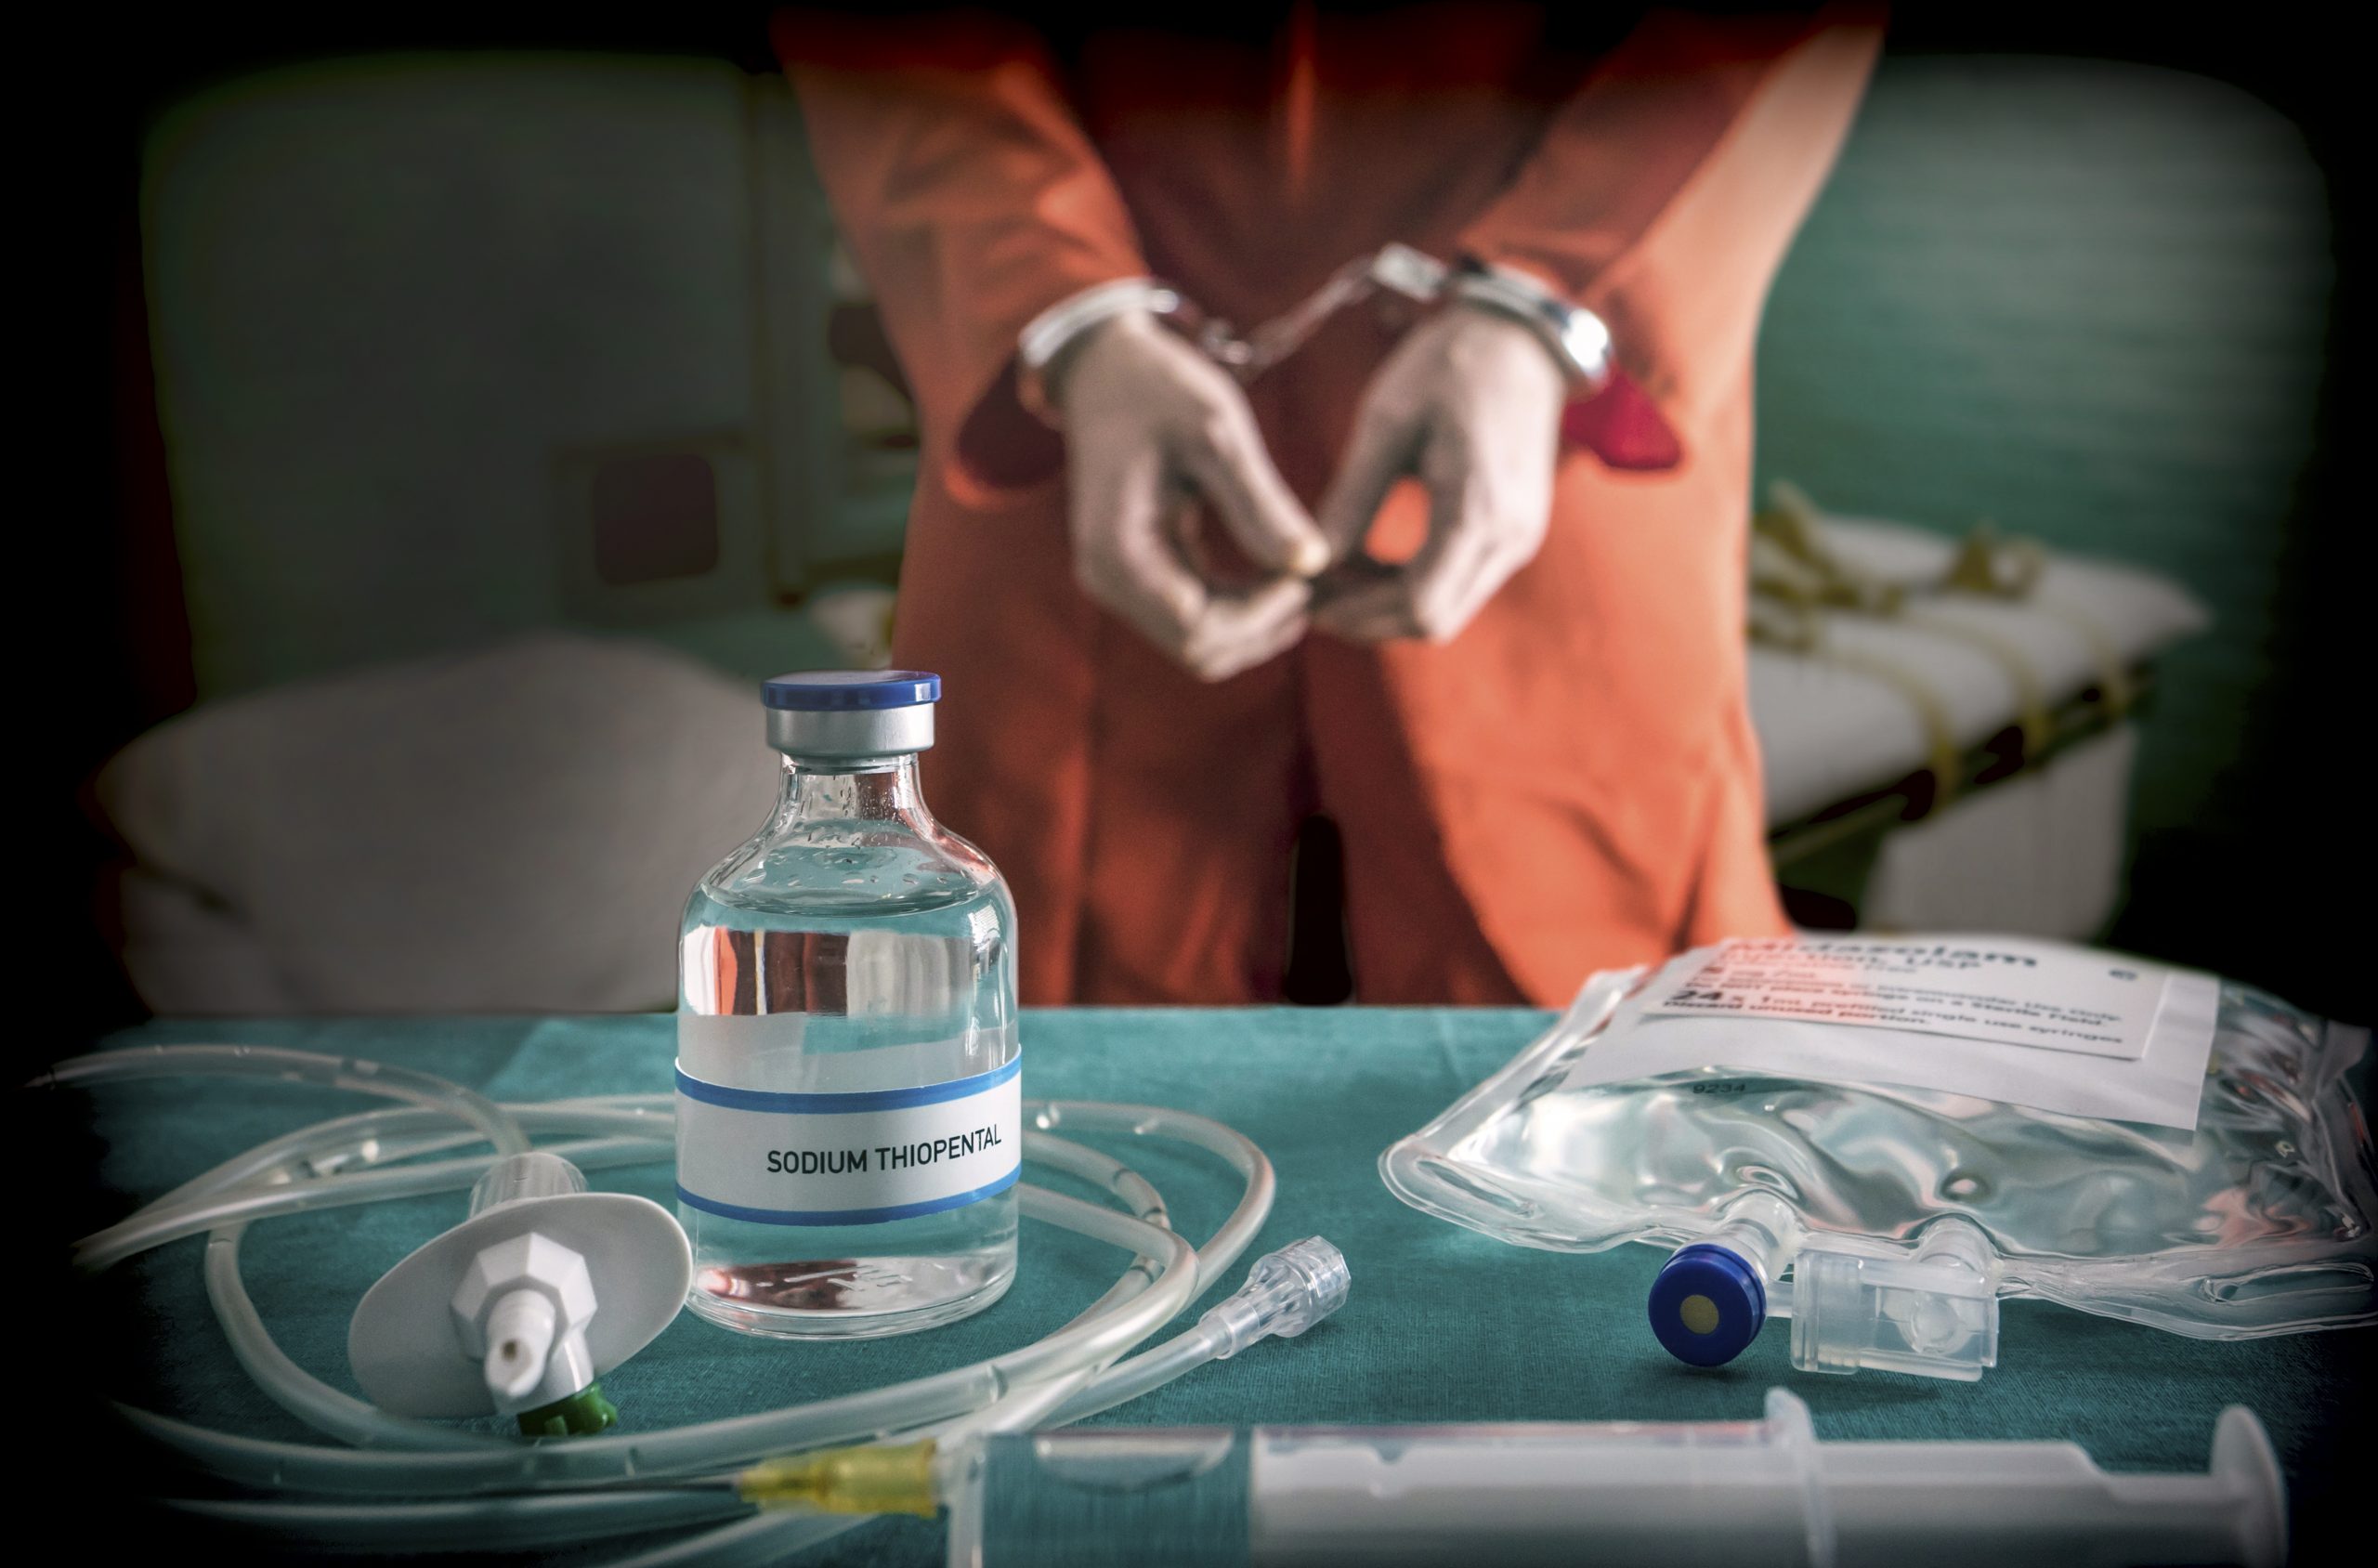 Prisoner handcuffed to death by lethal injection, vial with sodium thiopental and syringe on top of a table, conceptual image